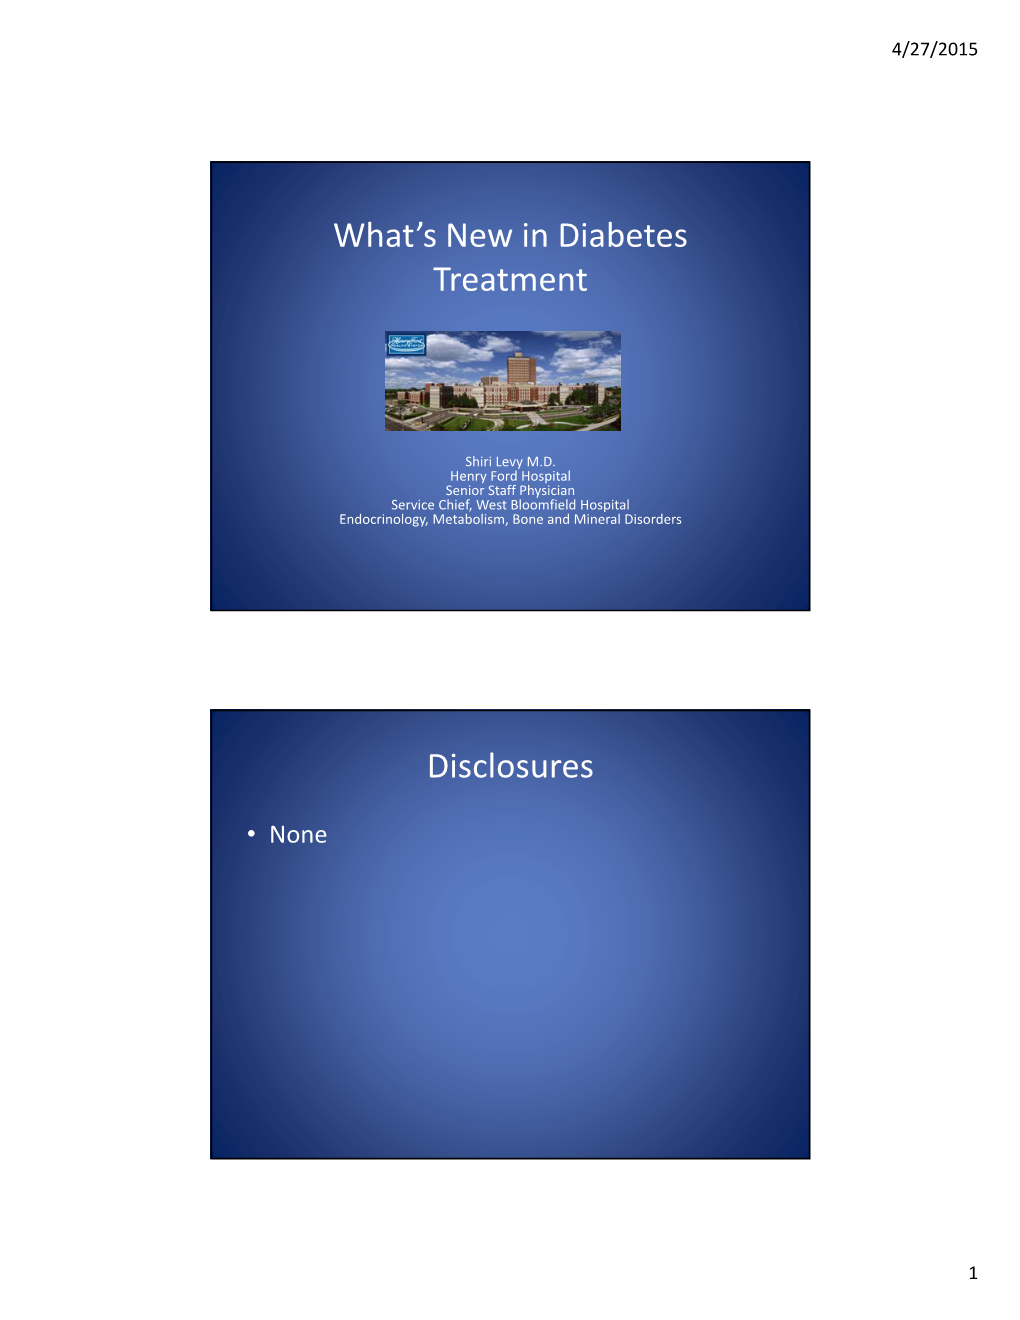 Whats New in Diabetes Treatment